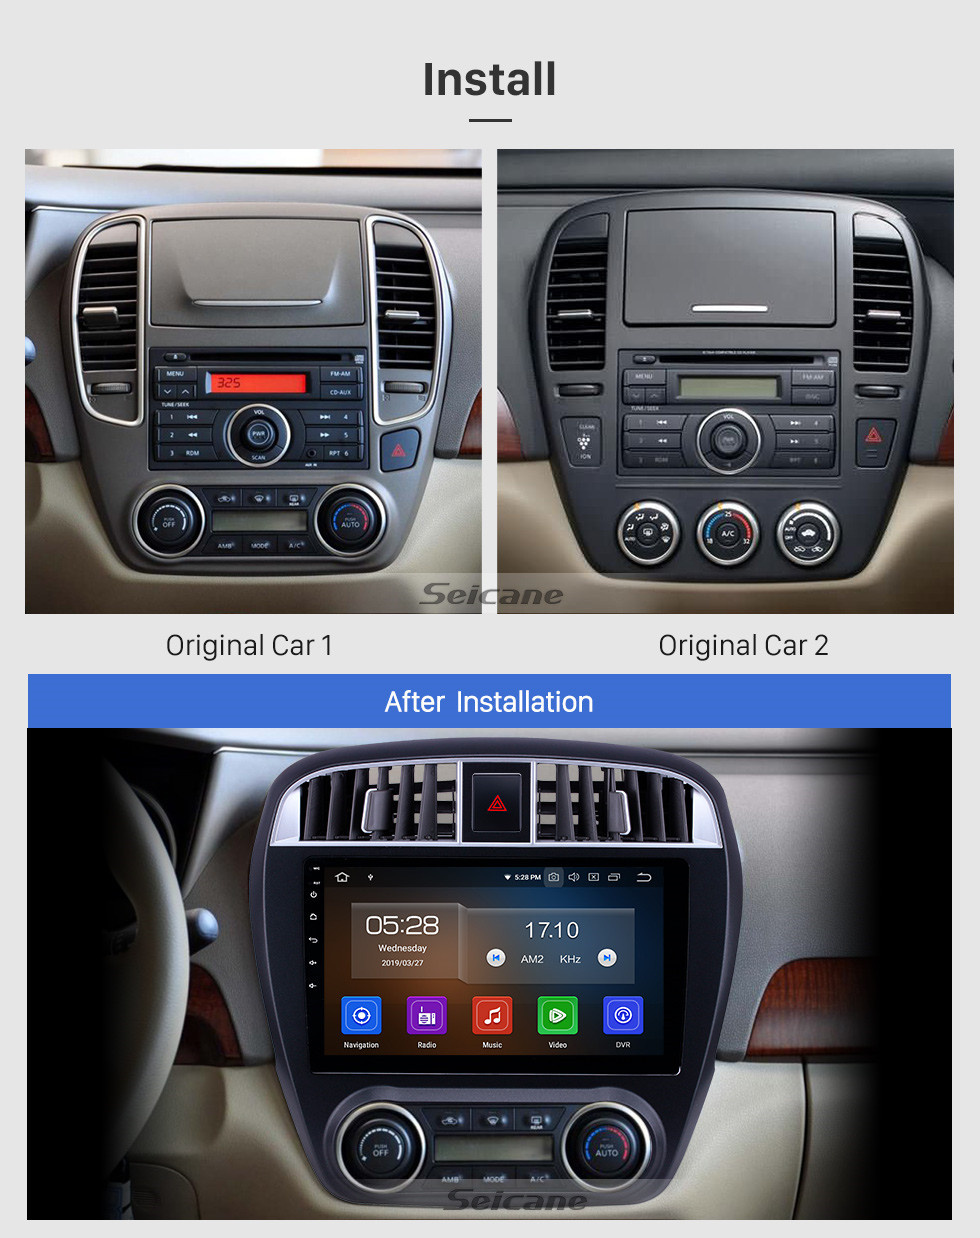 Seicane HD Touchscreen 2009 Nissan Sylphy Android 11.0 10.1 inch GPS Navigation Radio Bluetooth USB Carplay WIFI AUX support DAB+ Steering Wheel Control